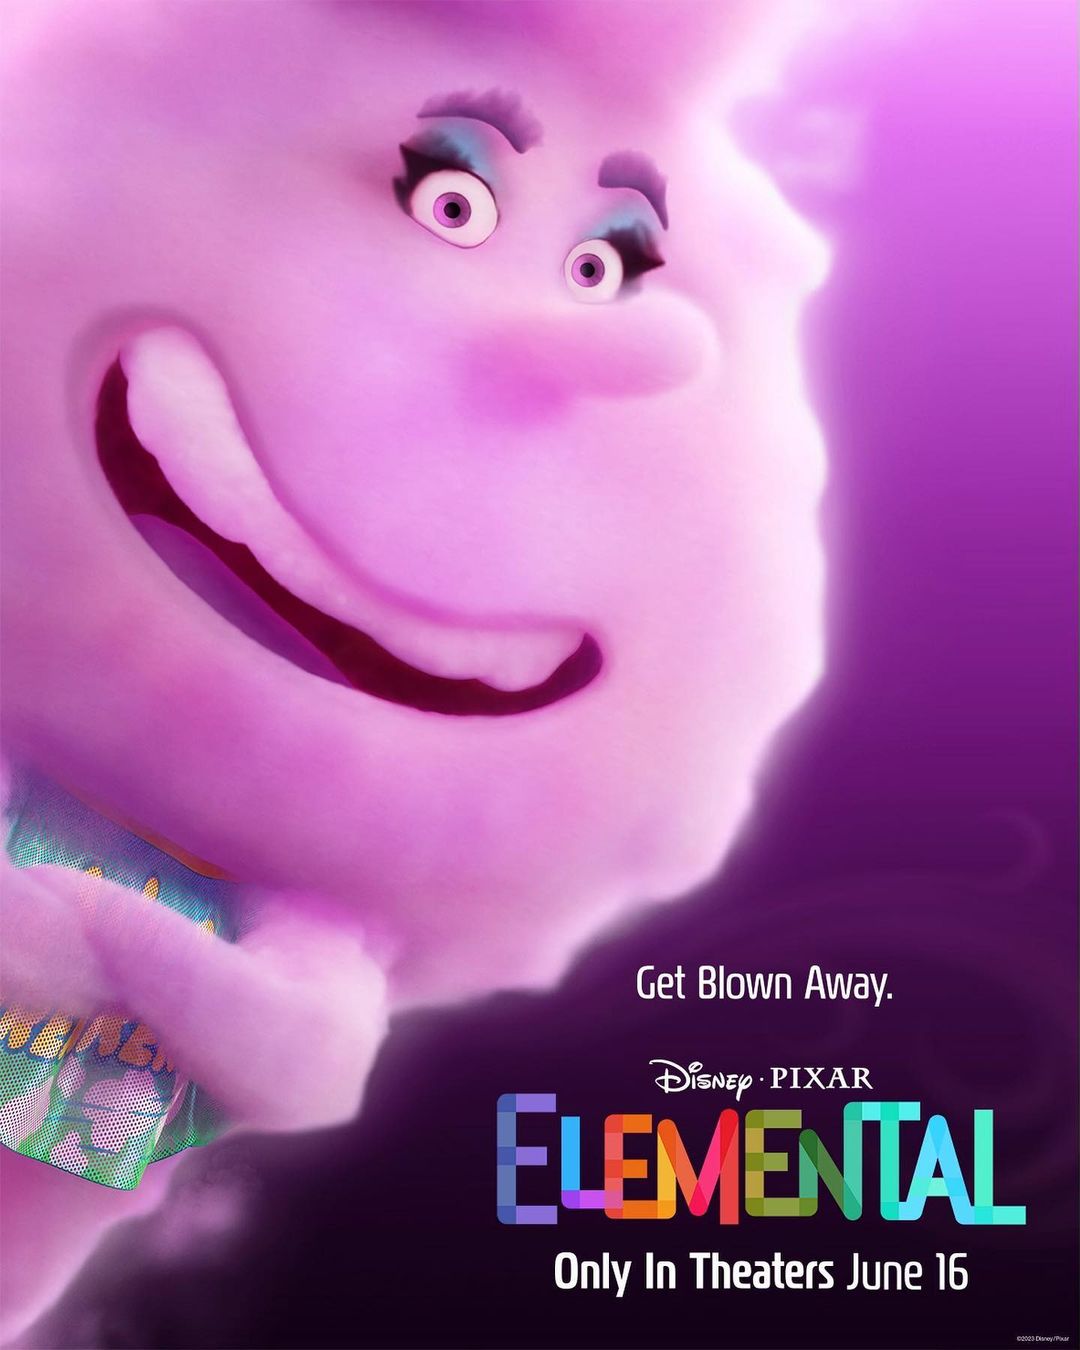 Elemental Movie (2023) Cast, Release Date, Story, Budget, Collection, Poster, Trailer, Review